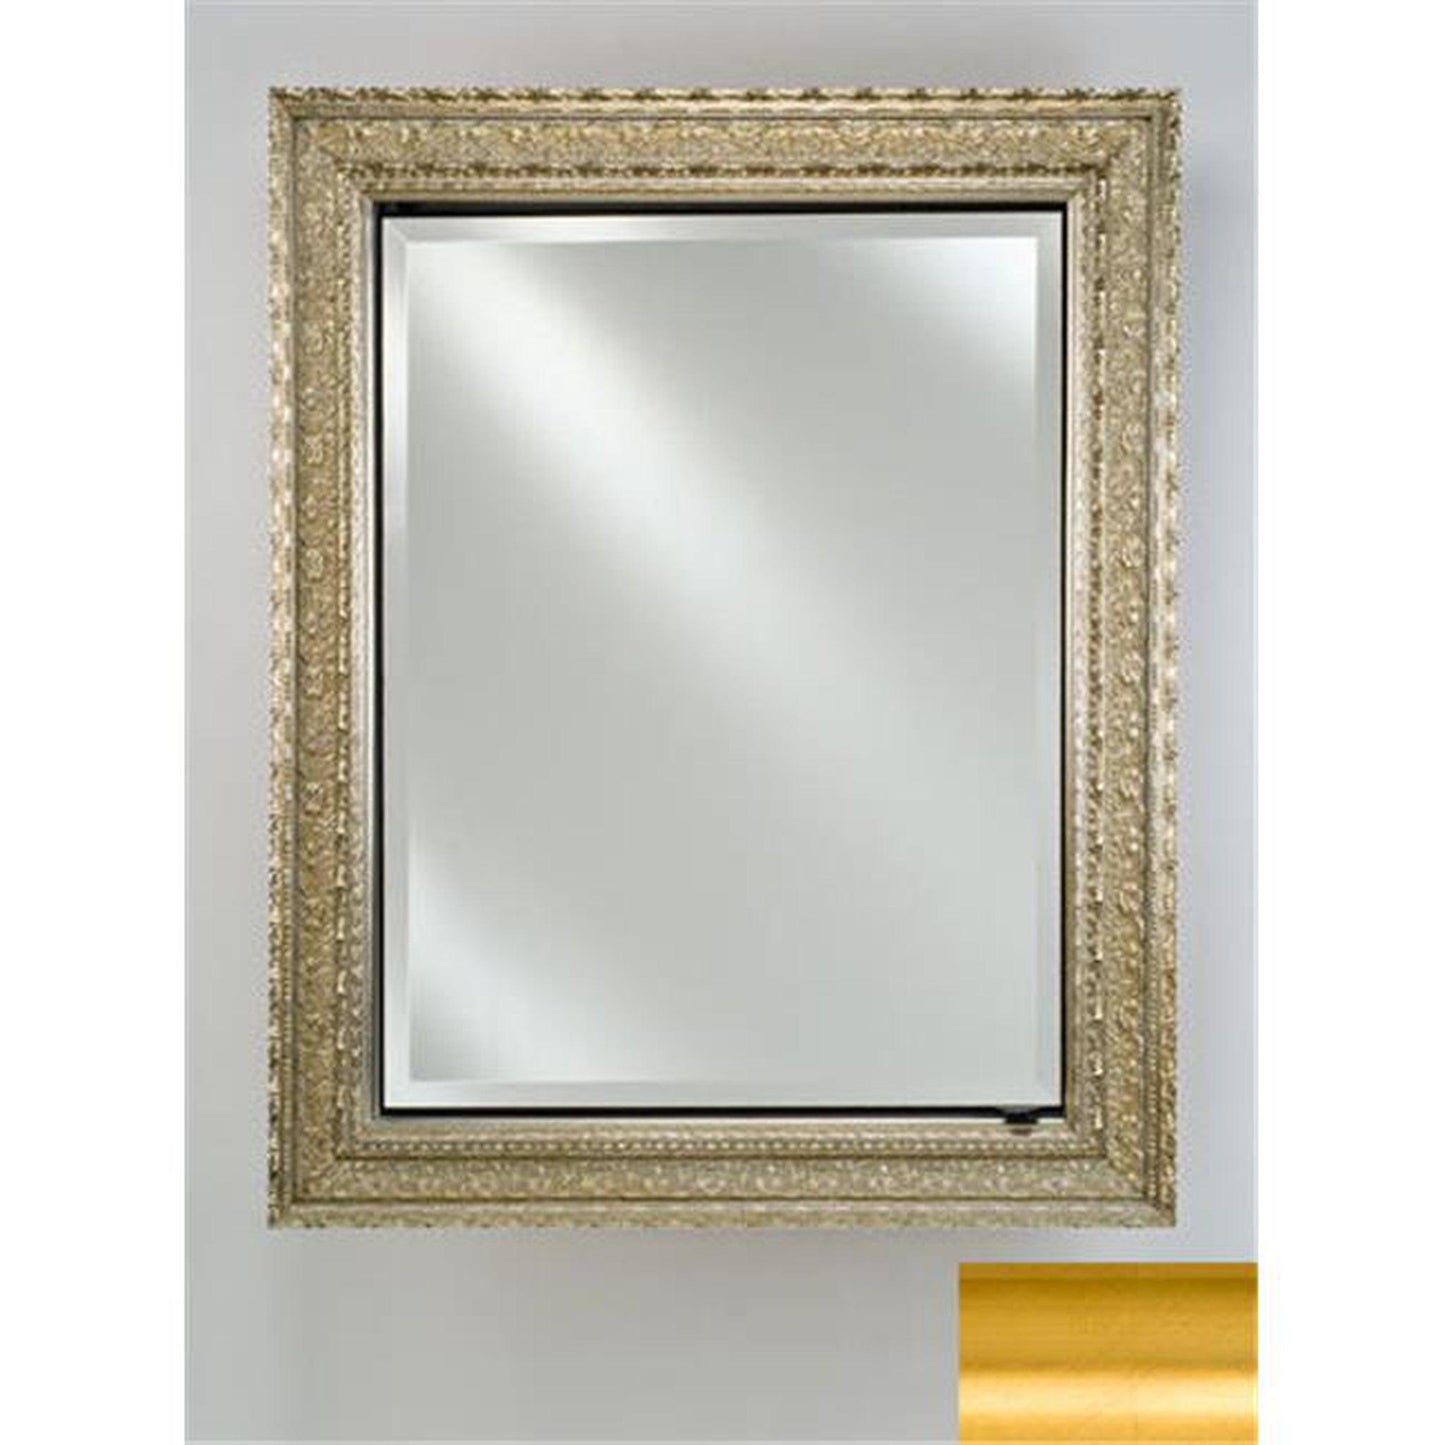 Afina Signature 17" x 30" Brushed Satin Gold Recessed Reversible Hinged Single Door Medicine Cabinet With Beveled Edge Mirror